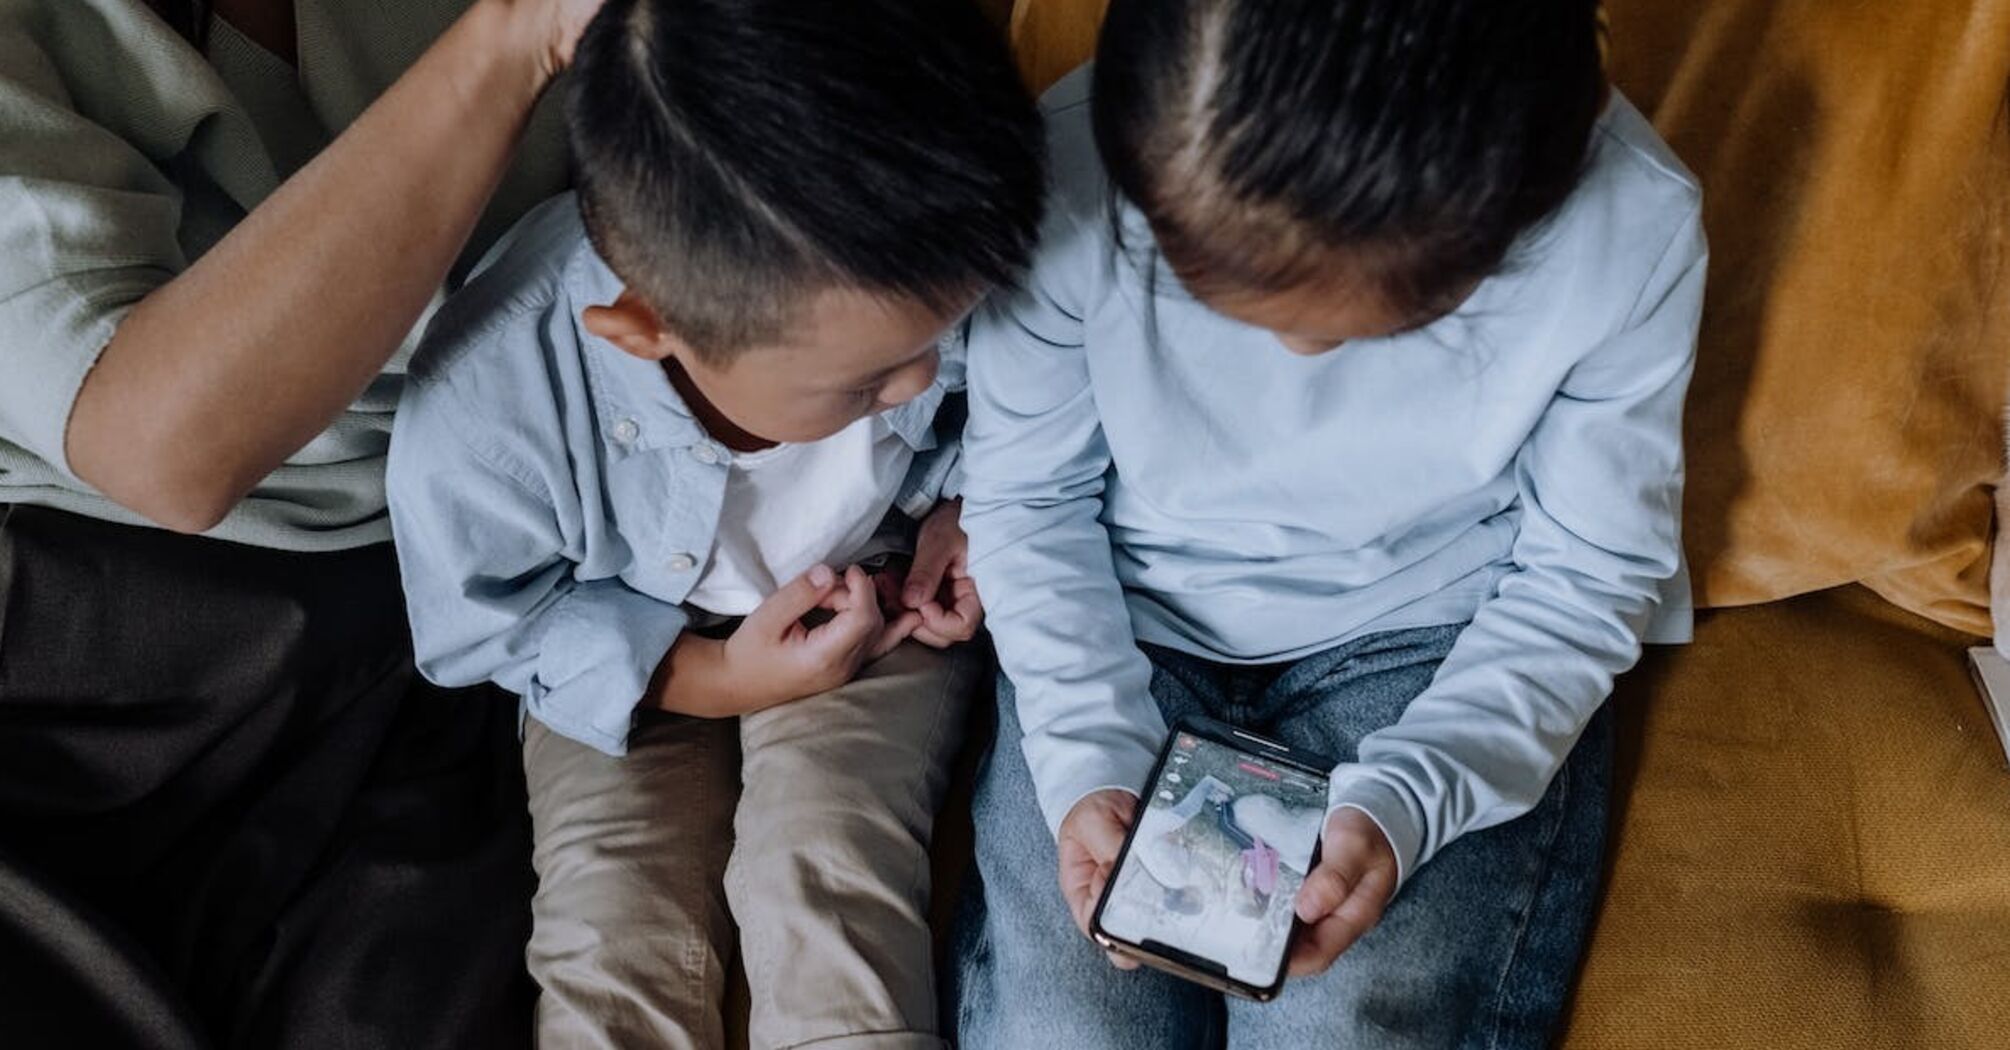 Neurologist told how much time it's safe for kids to spend with a smartphone in their hands